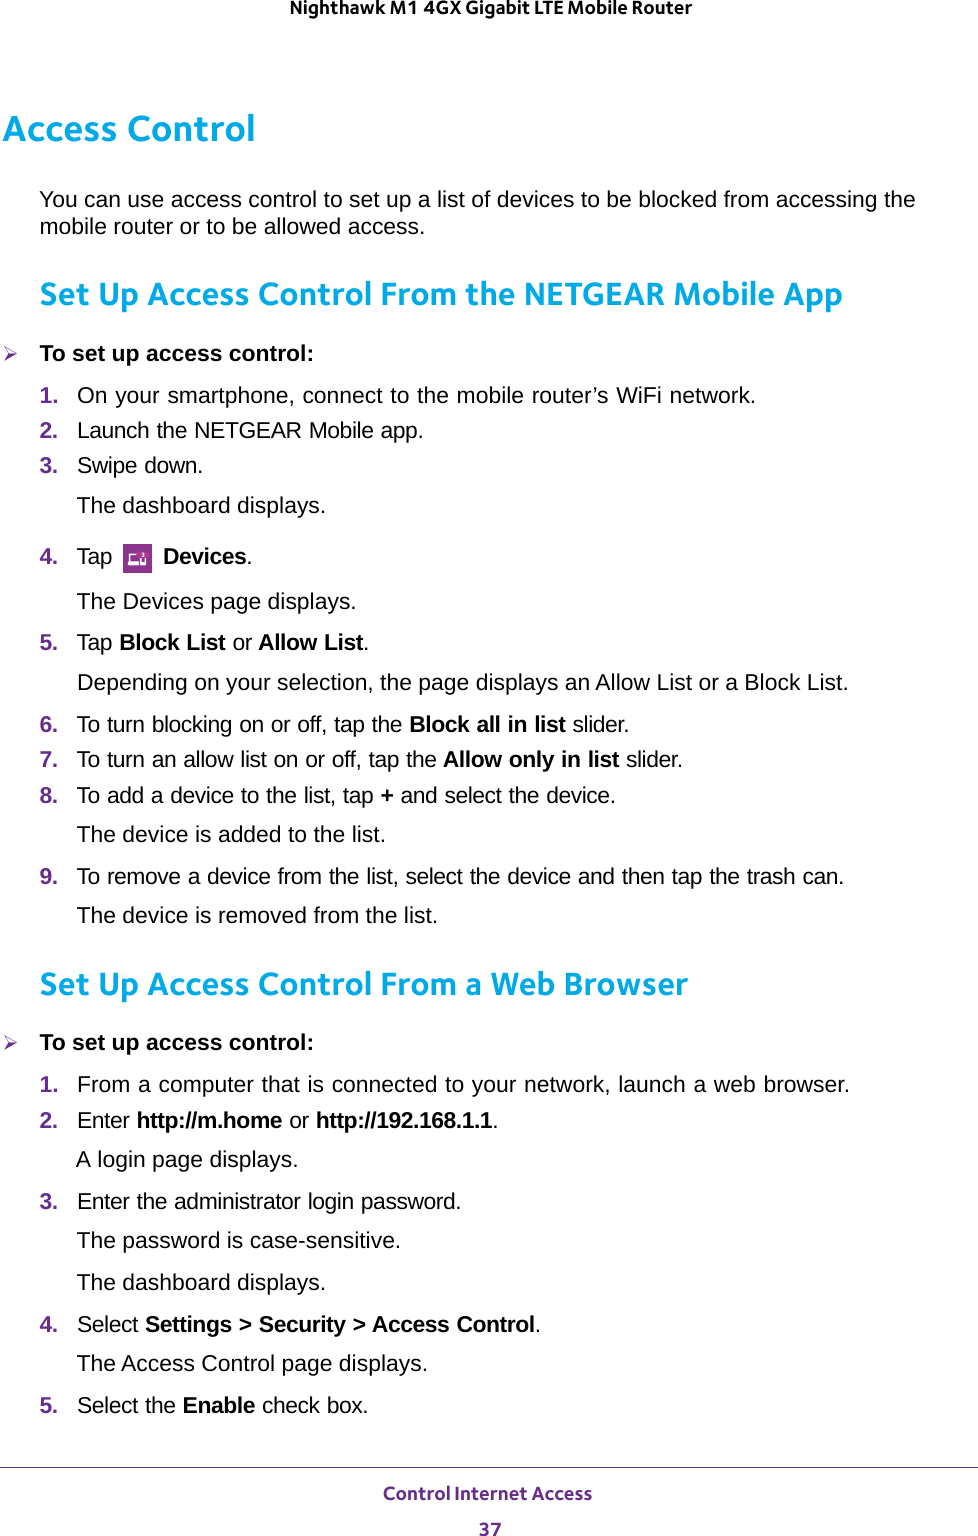 Control Internet Access 37 Nighthawk M1 4GX Gigabit LTE Mobile RouterAccess ControlYou can use access control to set up a list of devices to be blocked from accessing the mobile router or to be allowed access.Set Up Access Control From the NETGEAR Mobile AppTo set up access control:1.  On your smartphone, connect to the mobile router’s WiFi network.2.  Launch the NETGEAR Mobile app.3.  Swipe down.The dashboard displays.4.  Tap   Devices.The Devices page displays.5.  Tap Block List or Allow List.Depending on your selection, the page displays an Allow List or a Block List.6.  To turn blocking on or off, tap the Block all in list slider.7.  To turn an allow list on or off, tap the Allow only in list slider.8.  To add a device to the list, tap + and select the device.The device is added to the list.9.  To remove a device from the list, select the device and then tap the trash can.The device is removed from the list.Set Up Access Control From a Web BrowserTo set up access control:1.  From a computer that is connected to your network, launch a web browser.2.  Enter http://m.home or http://192.168.1.1.A login page displays.3.  Enter the administrator login password.The password is case-sensitive.The dashboard displays.4.  Select Settings &gt; Security &gt; Access Control.The Access Control page displays.5.  Select the Enable check box.